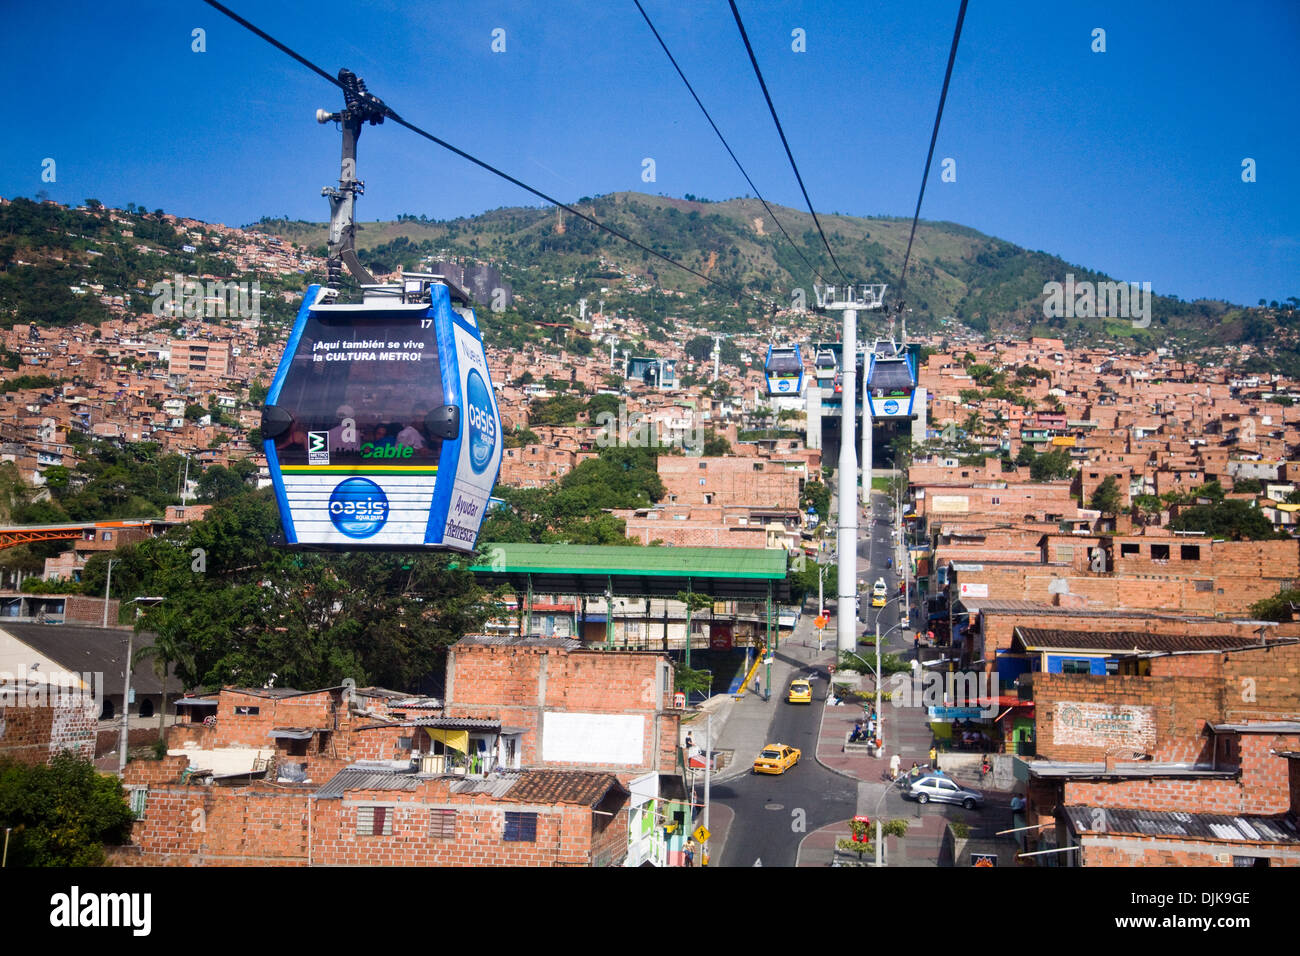 Medellin's slums seen from the cable car, Colombia Stock Photo